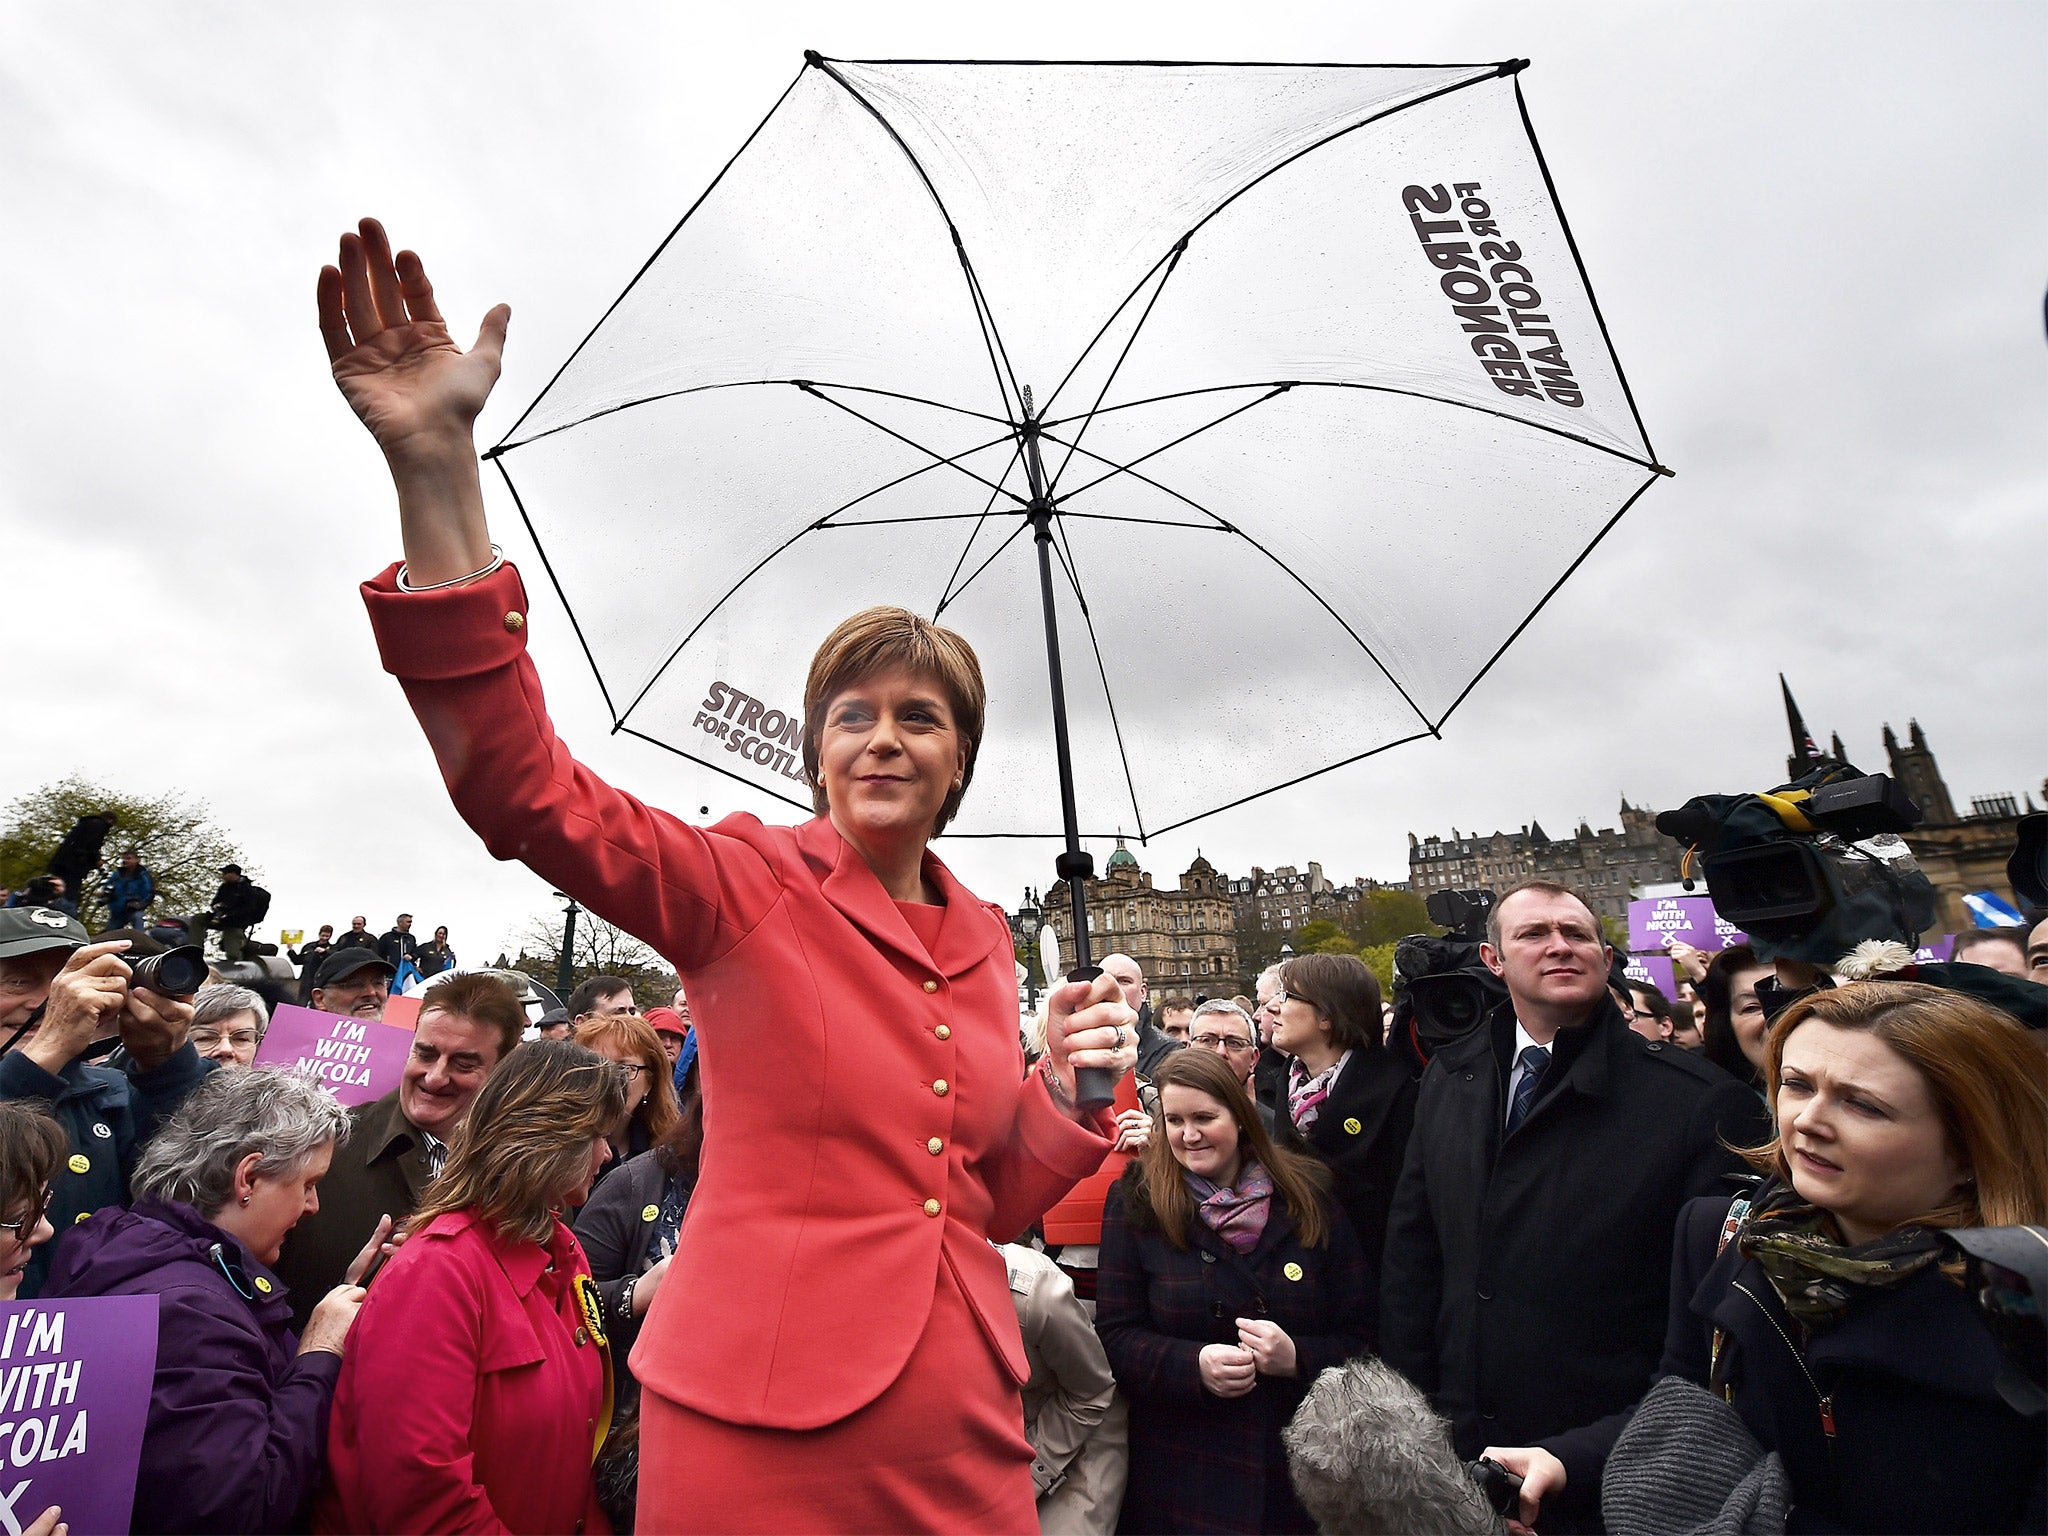 Nicola Sturgeon marked the final day of campaigning with a speech to activists at the Mound in Edinburgh